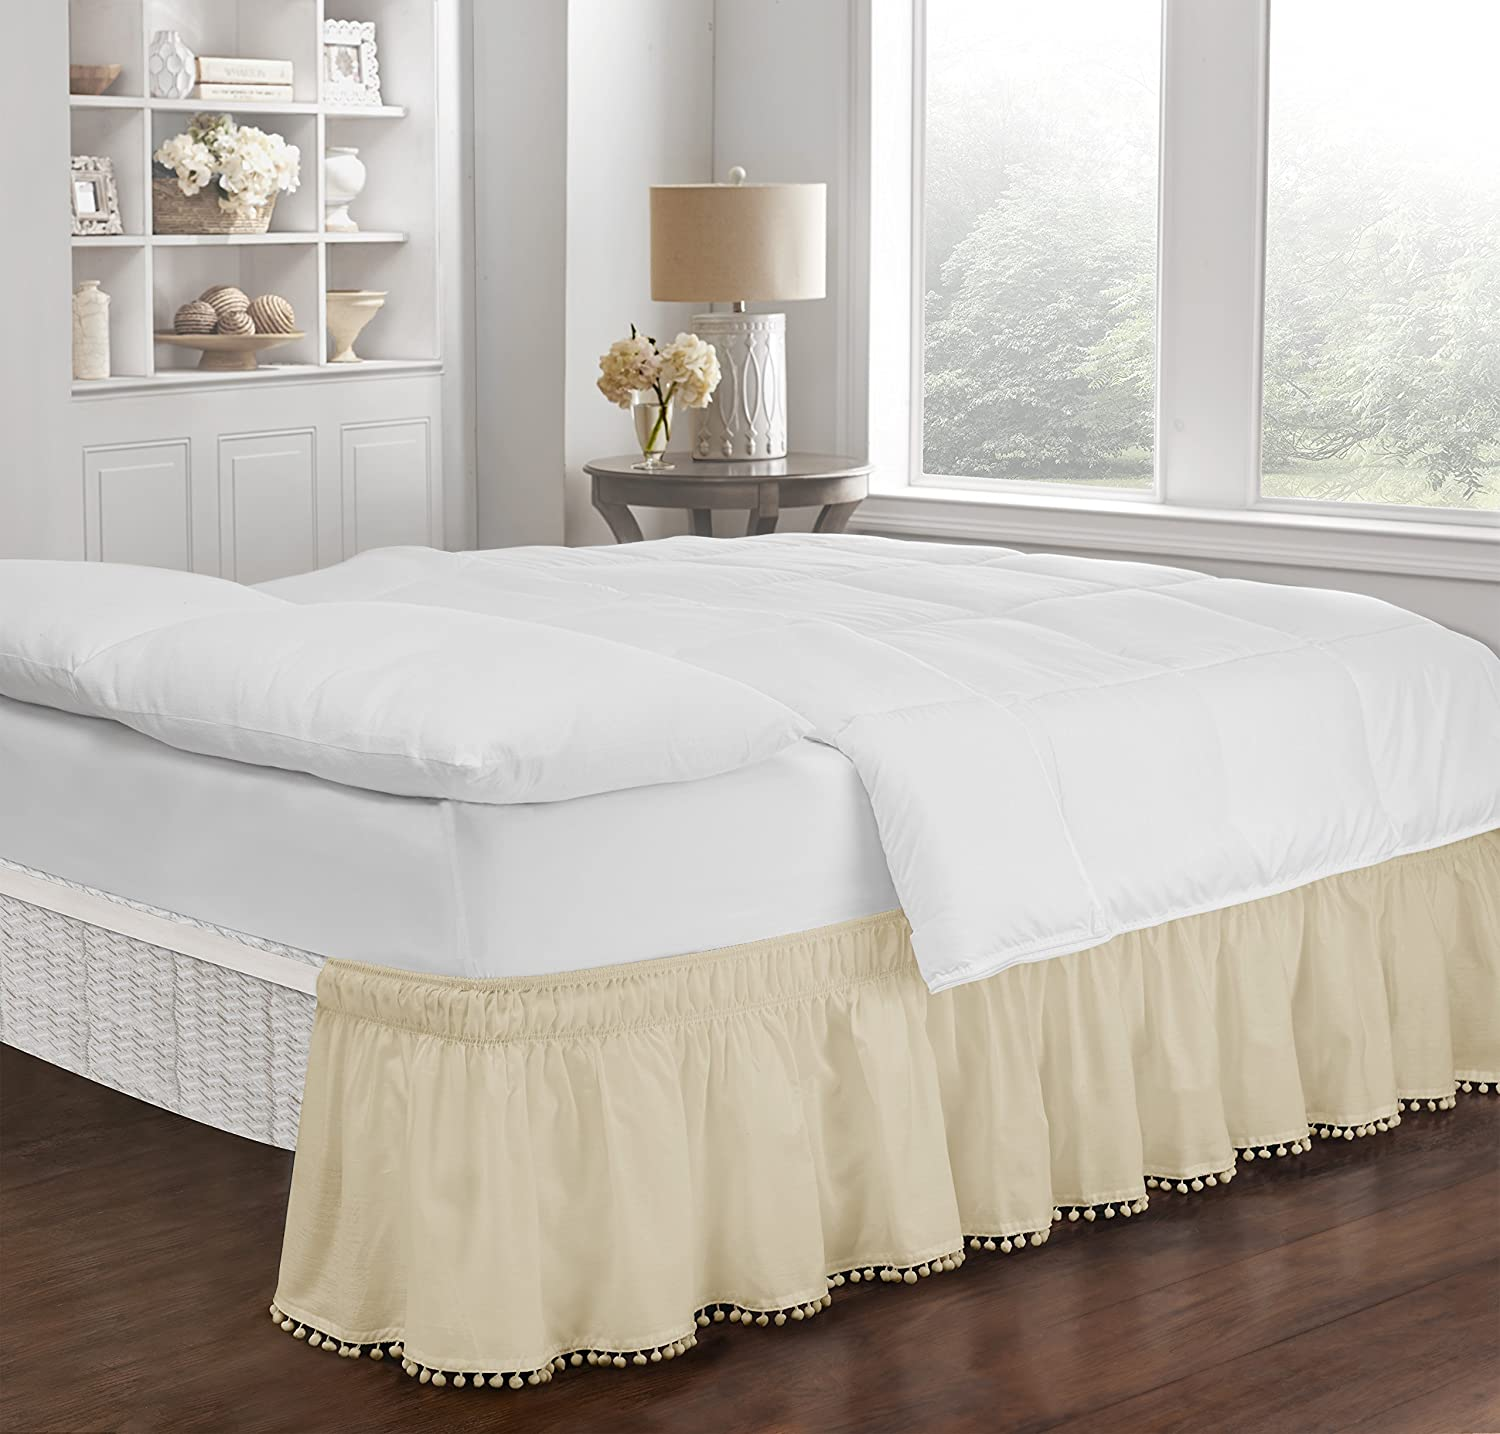 Modern bed skirt and dust ruffle designs allow you to install without lifting a mattress.